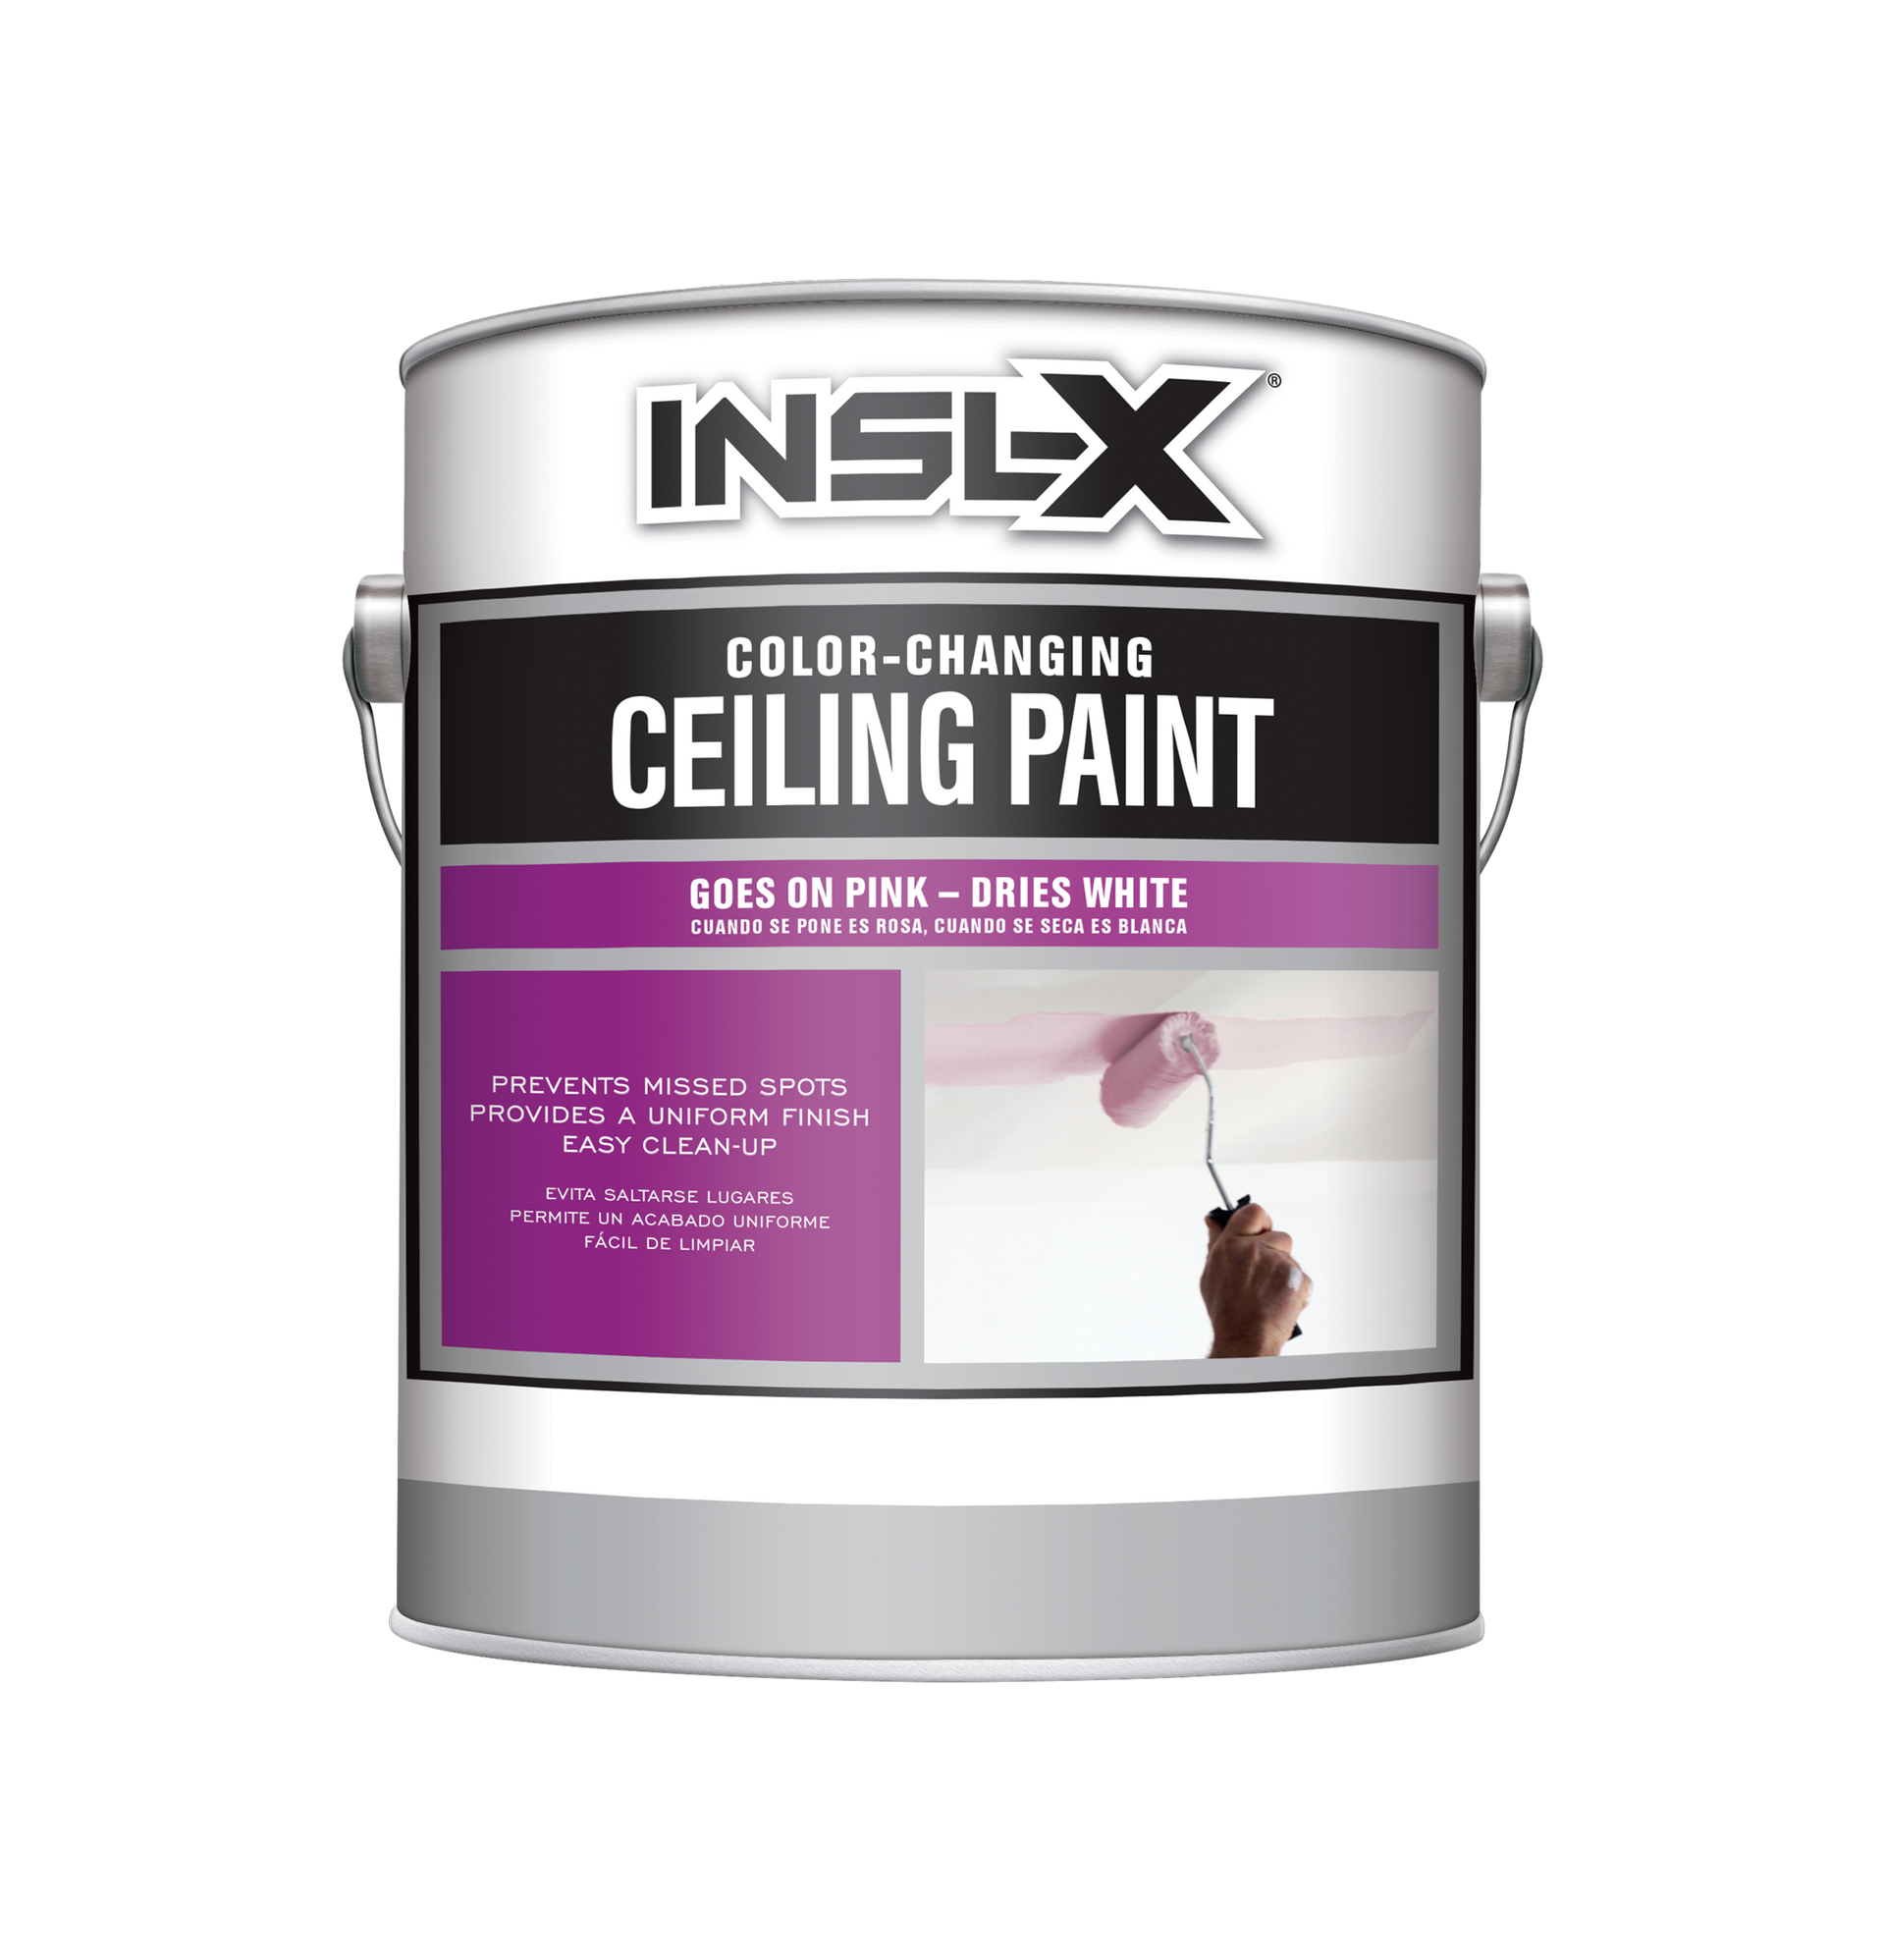 Benjamin Moore® INSL-X® Color-Changing Ceiling Paint in Omaha, Nebraska (NE) and Des Moines, Iowa (IA)